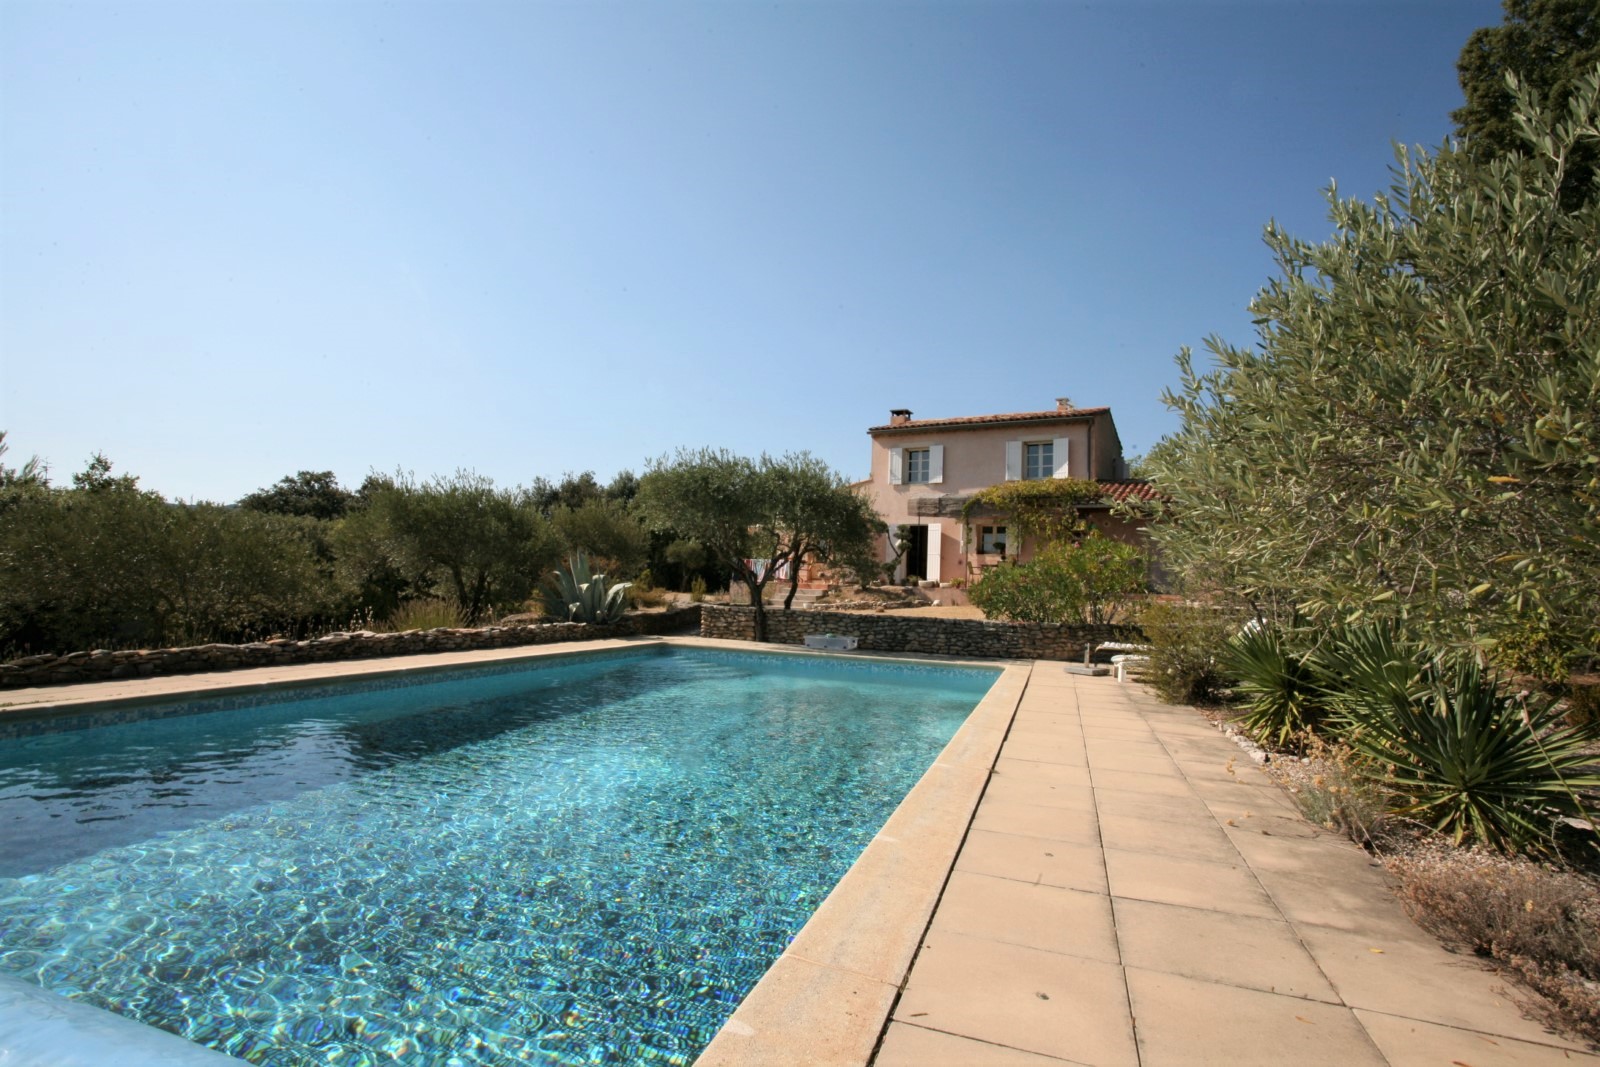 Villa for sale with swimming pool, offering beautiful views of the Luberon